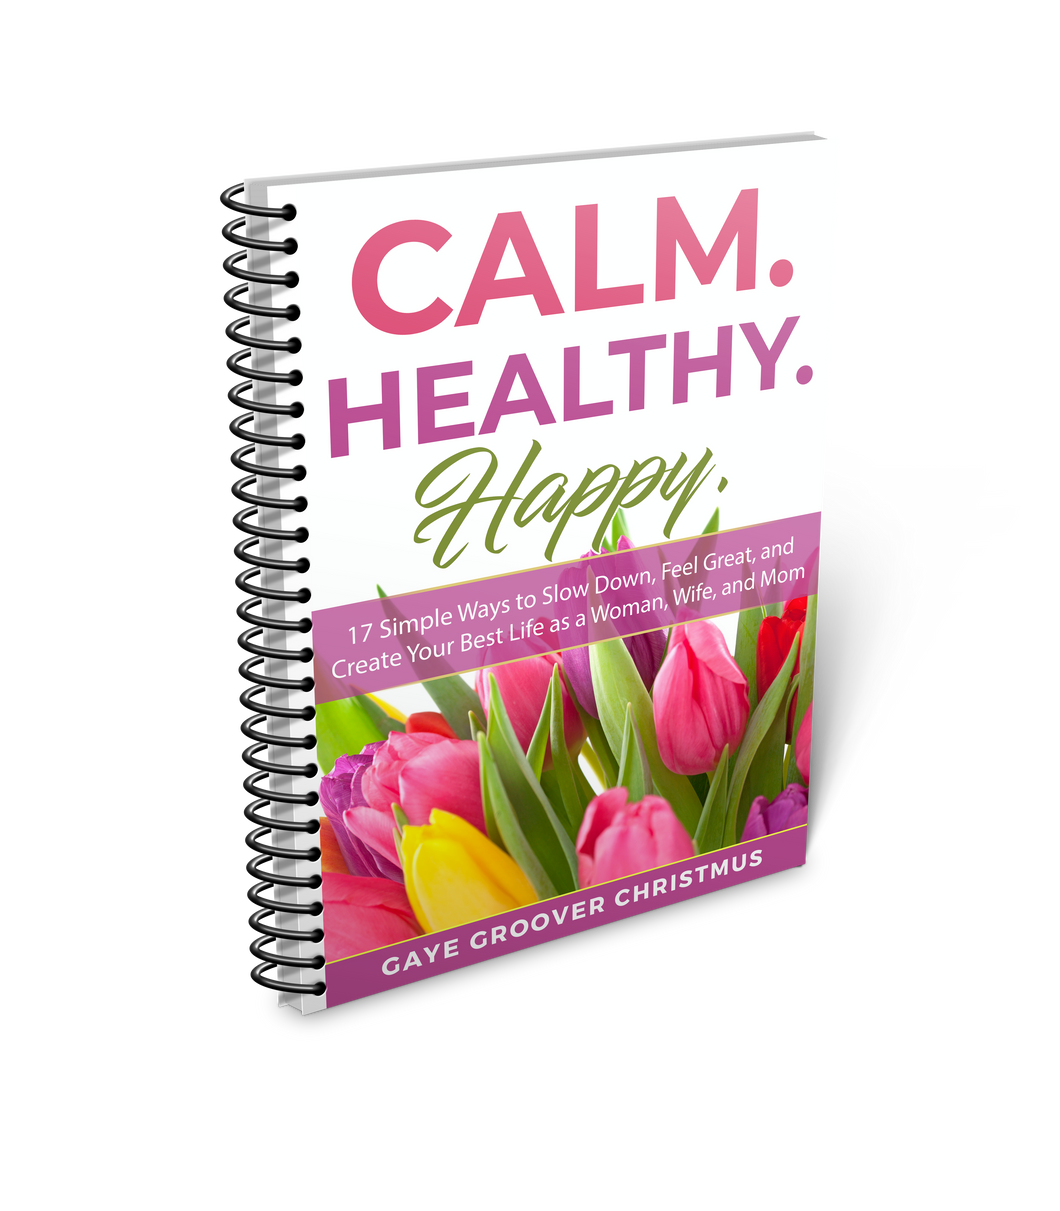 Calm. Healthy. Happy. - 17 Simple Ways to Slow Down, Feel Great, and Create Your Best Life as a Woman, Wife, and Mom